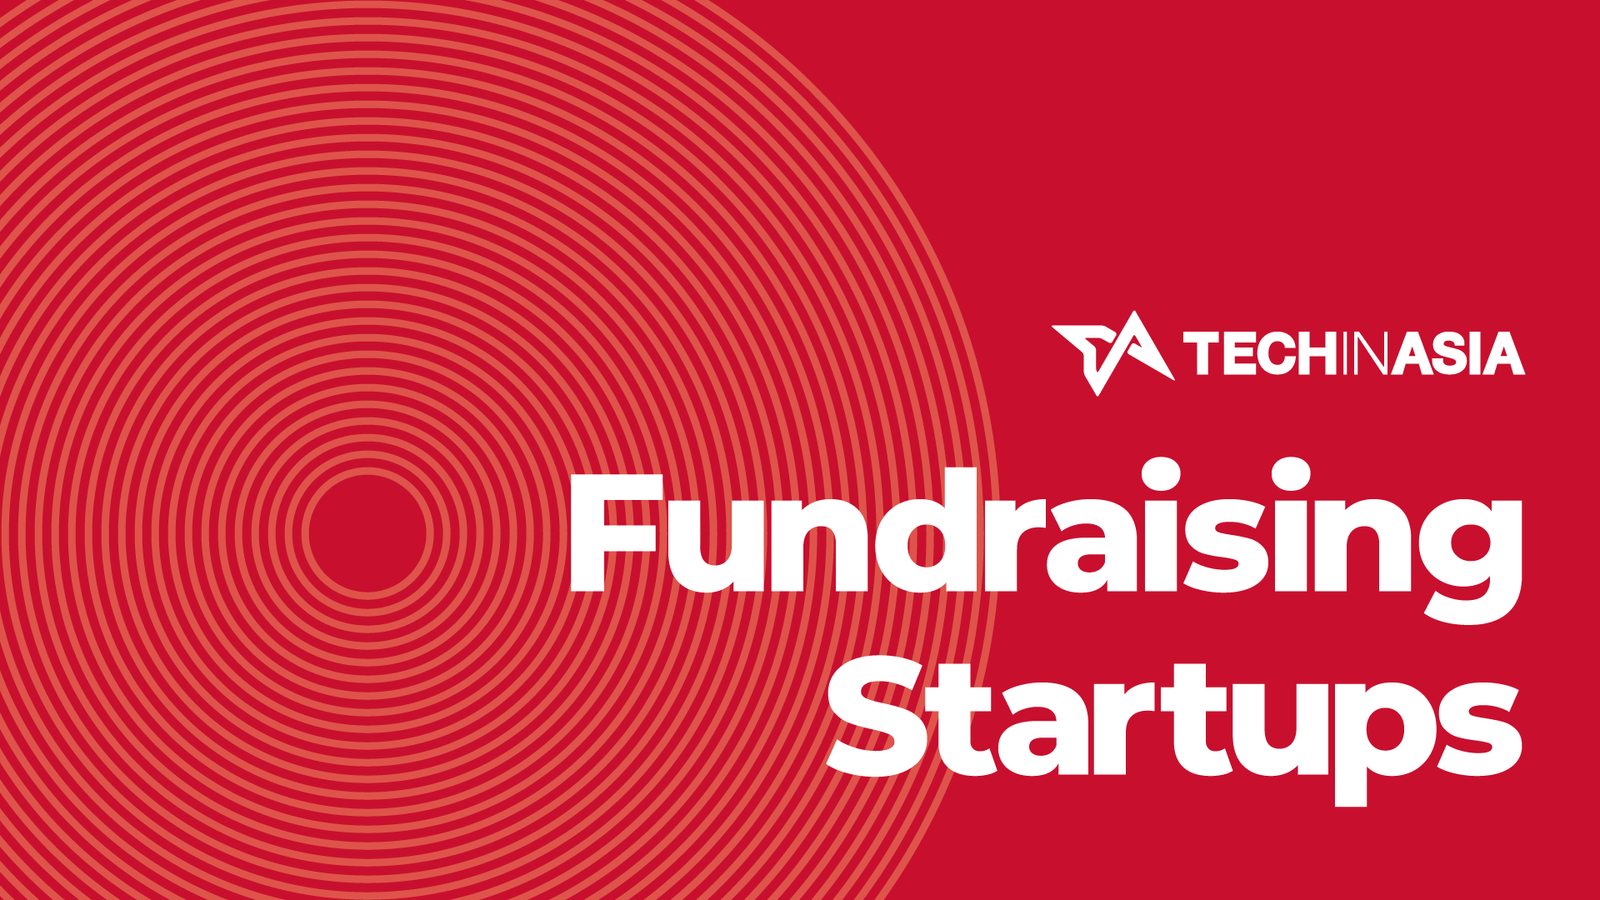 A list of fundraising startups from Asia - Asianbusinessmen